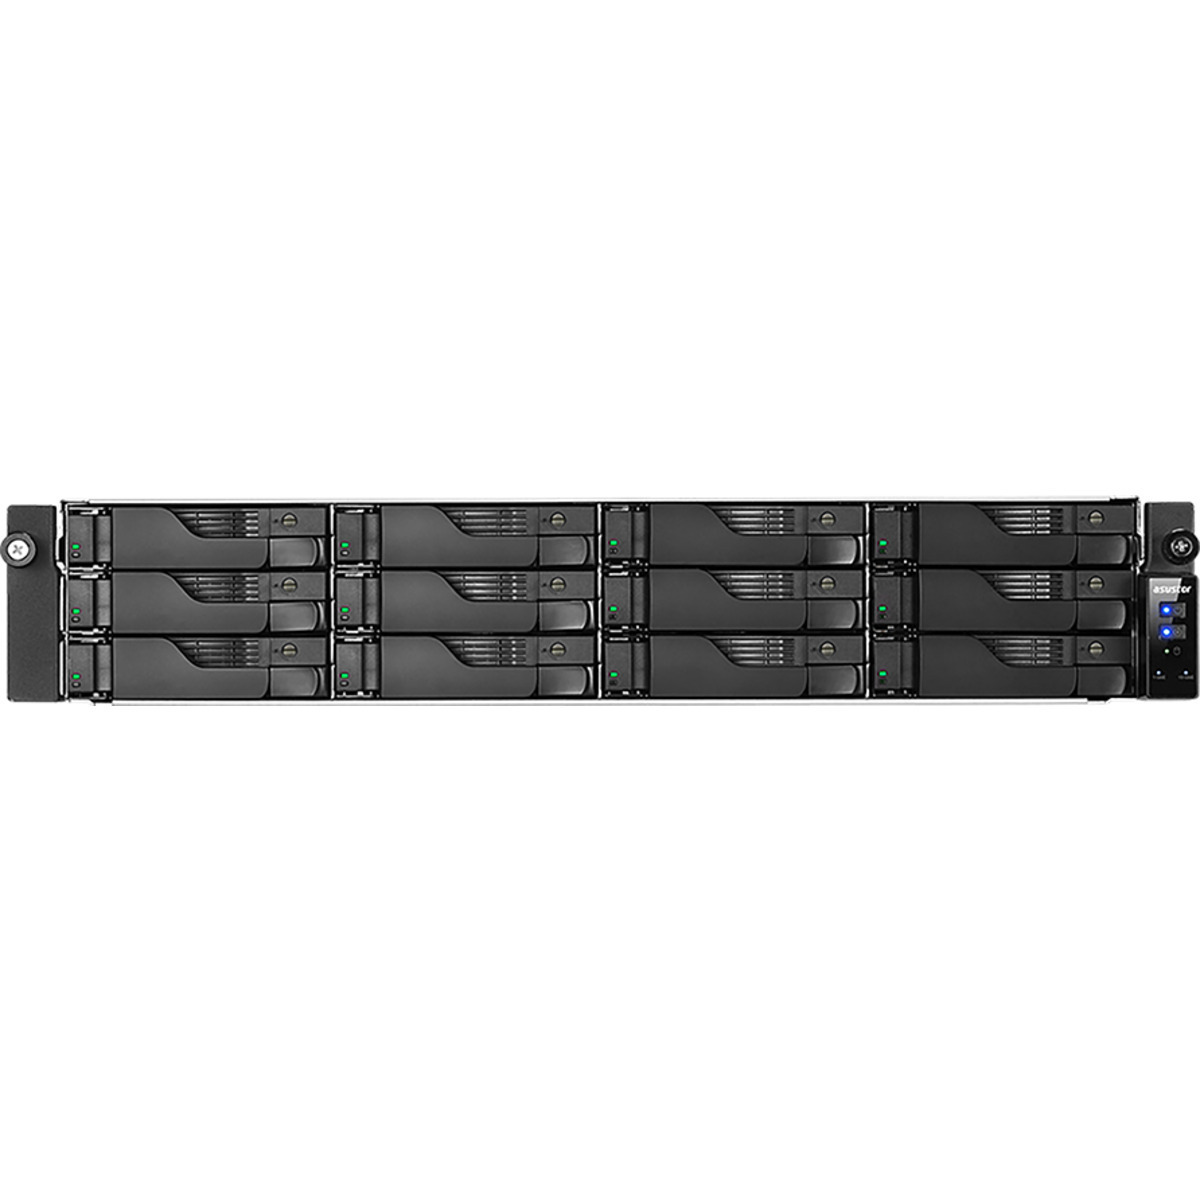 ASUSTOR LOCKERSTOR 12RD AS6512RD 168tb 12-Bay RackMount Multimedia / Power User / Business NAS - Network Attached Storage Device 12x14tb Seagate EXOS X18 ST14000NM000J 3.5 7200rpm SATA 6Gb/s HDD ENTERPRISE Class Drives Installed - Burn-In Tested - FREE RAM UPGRADE LOCKERSTOR 12RD AS6512RD